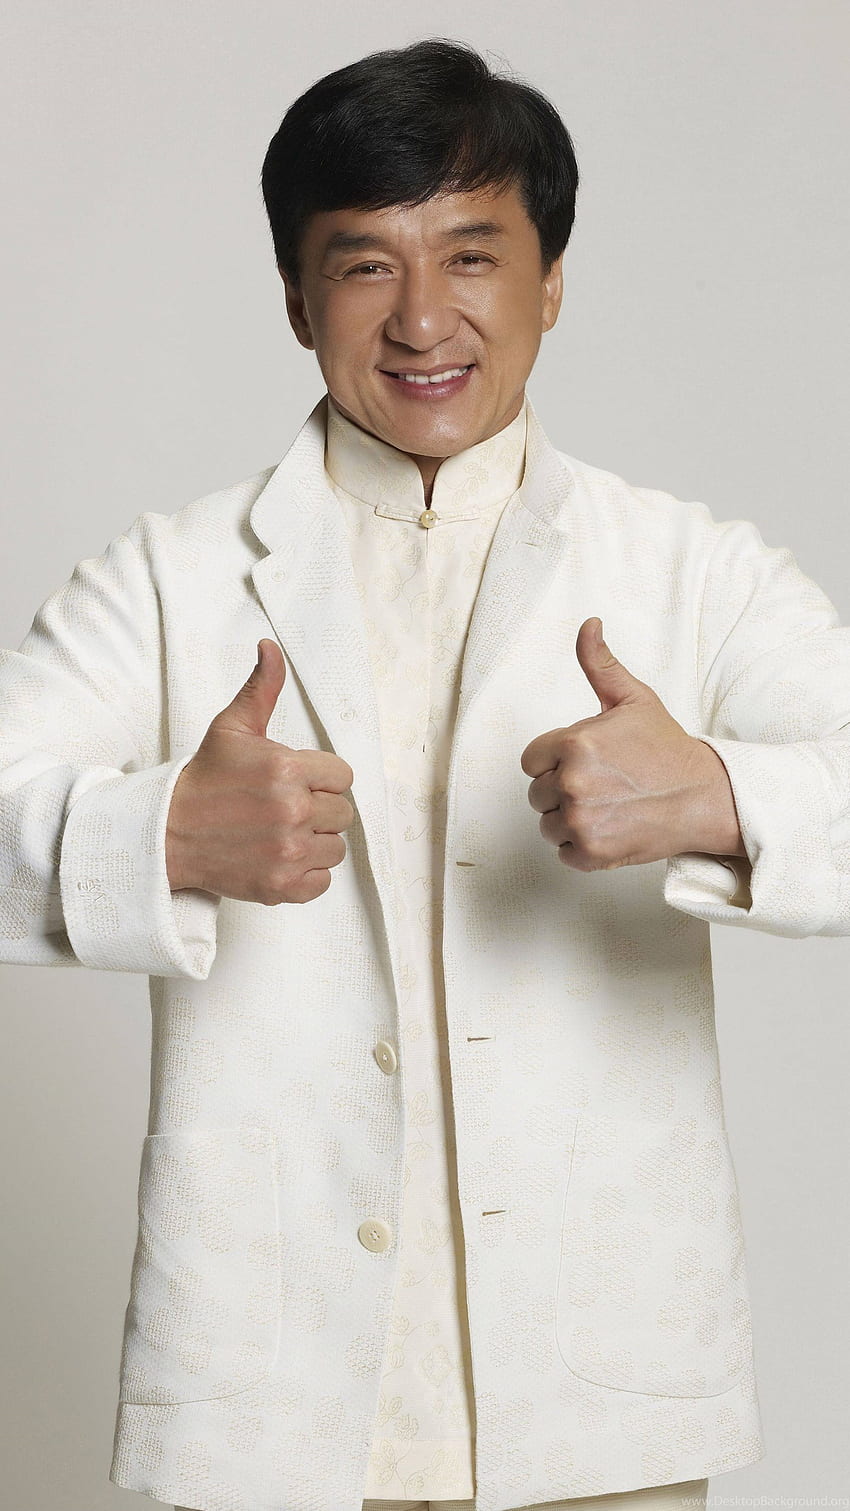 13152 Jackie Chan Photos and Premium High Res Pictures  Getty Images